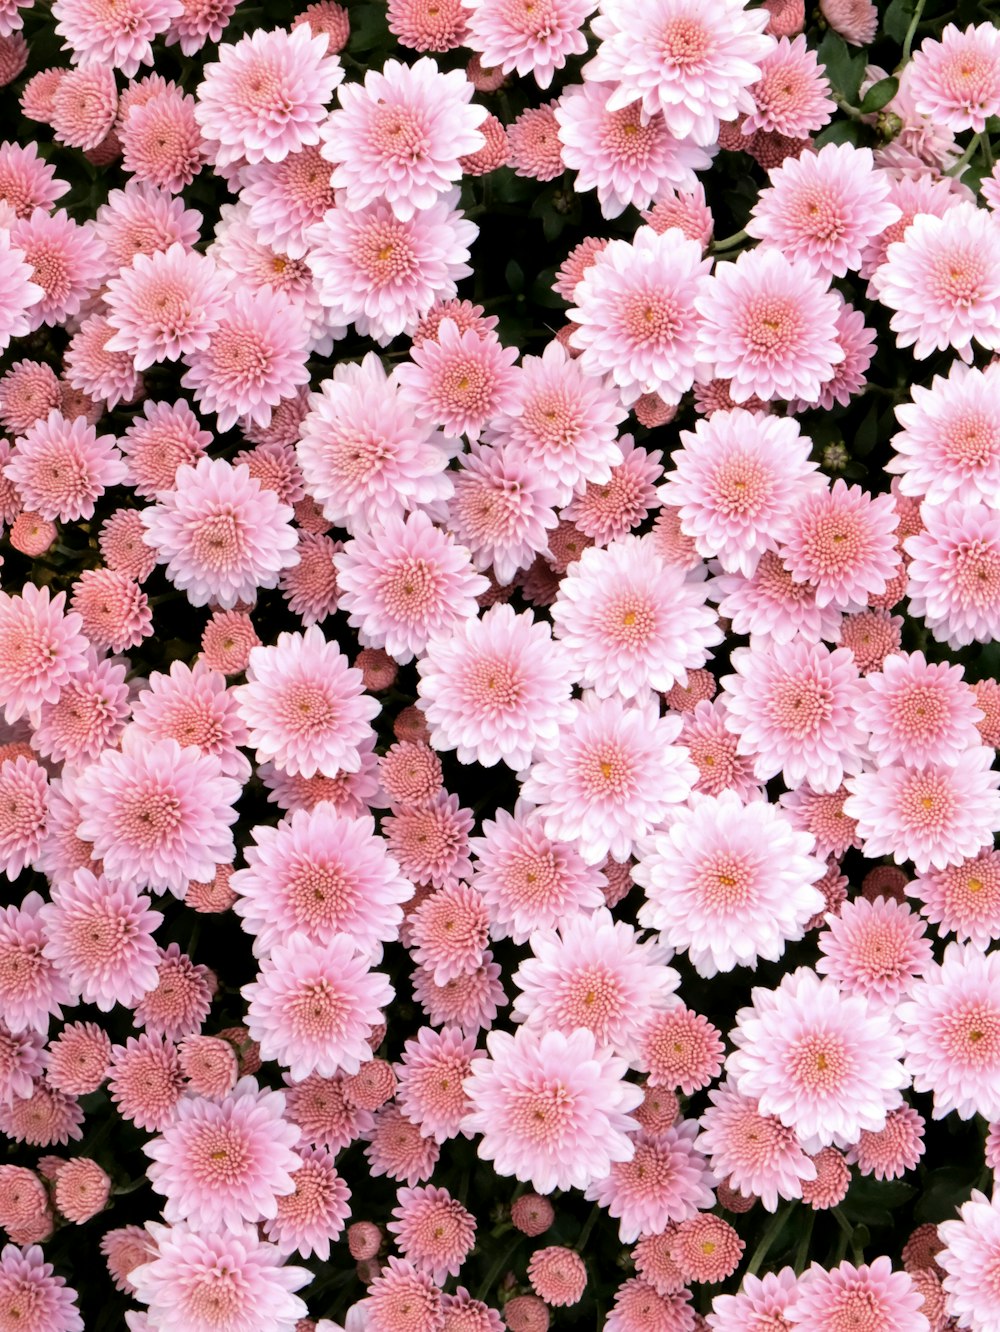 a large group of pink flowers